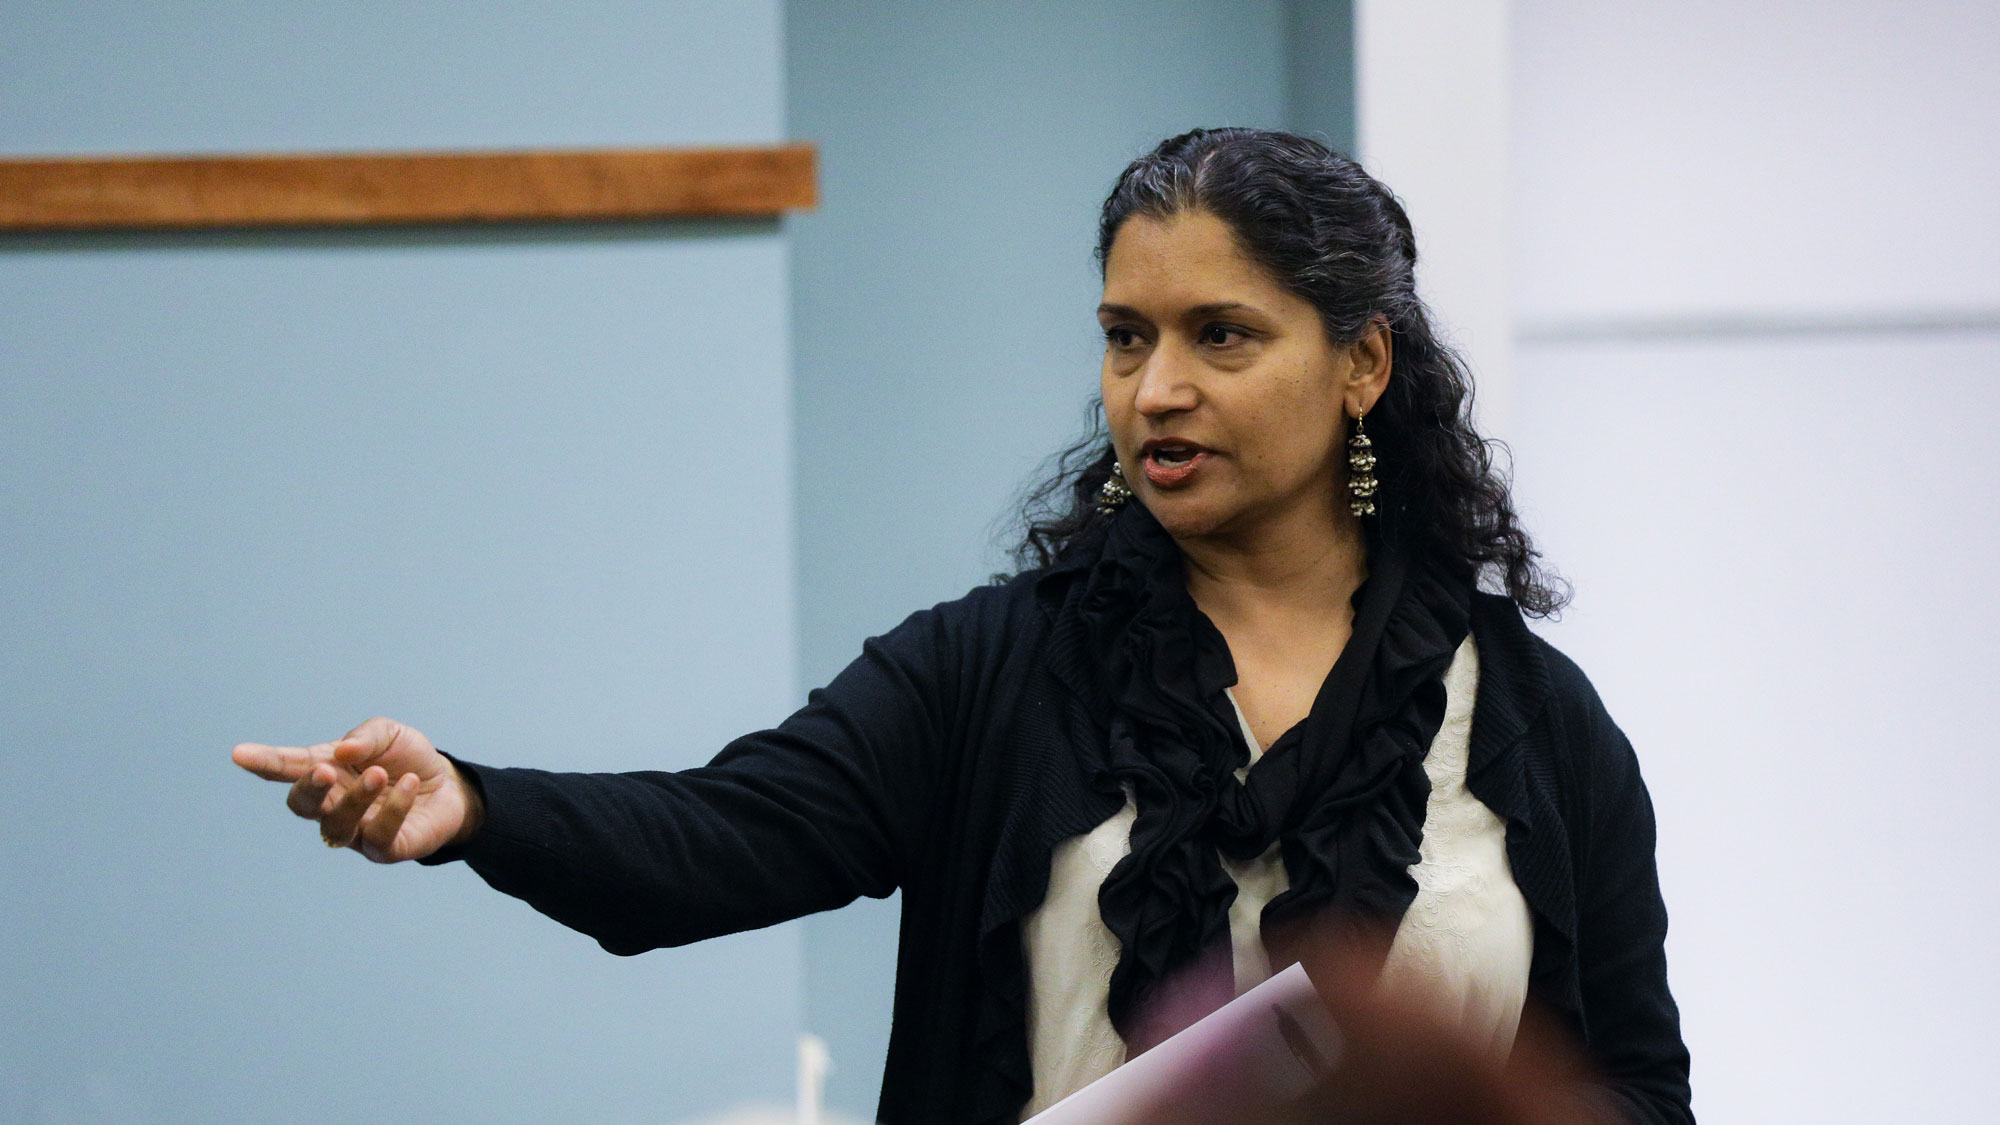 Professor Nair lecturing to a class